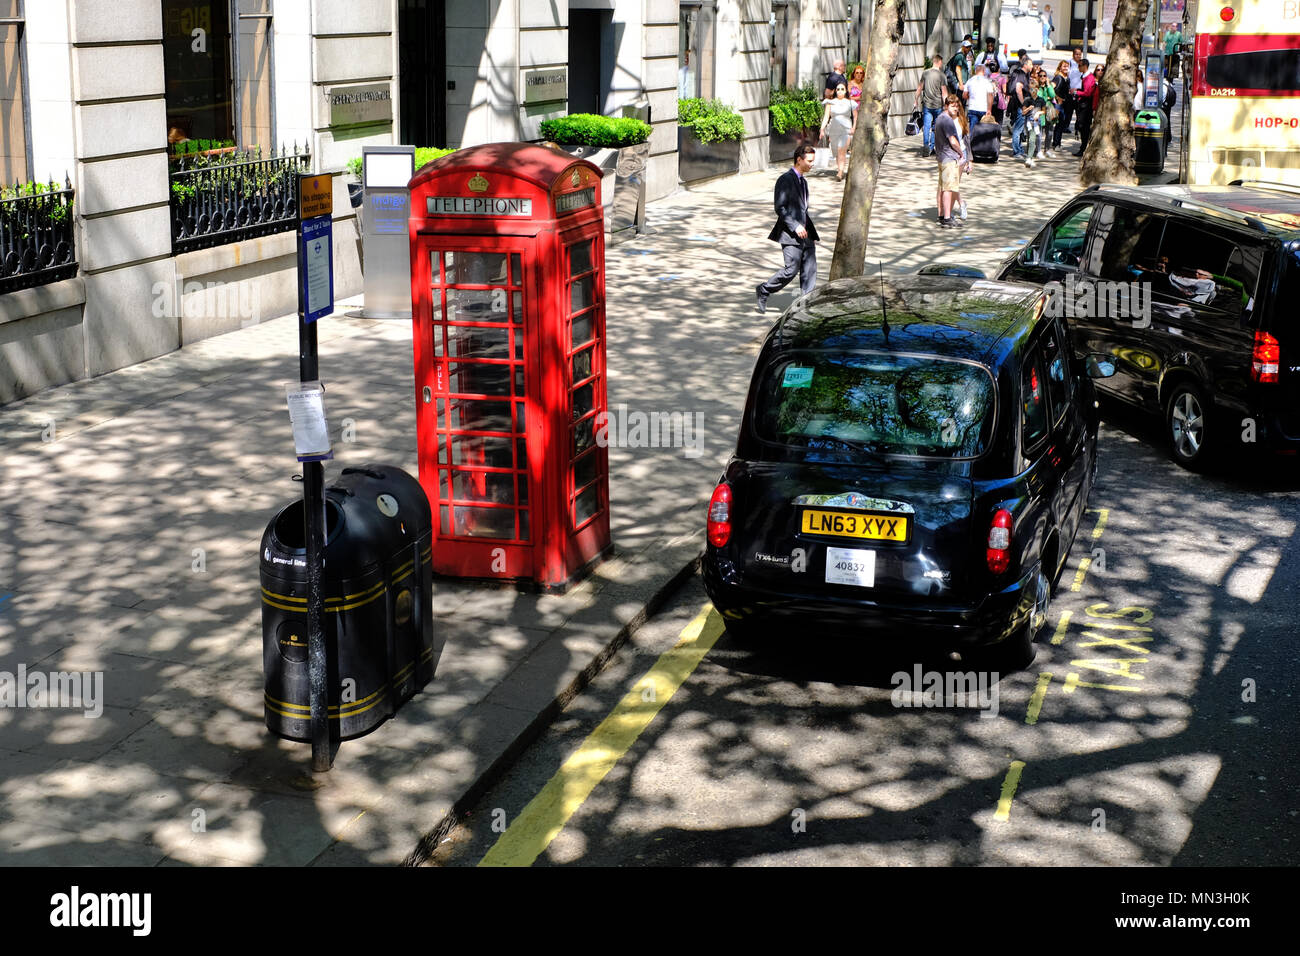 Traditionelle rote Telefonzelle Aldwych - London Stockfoto